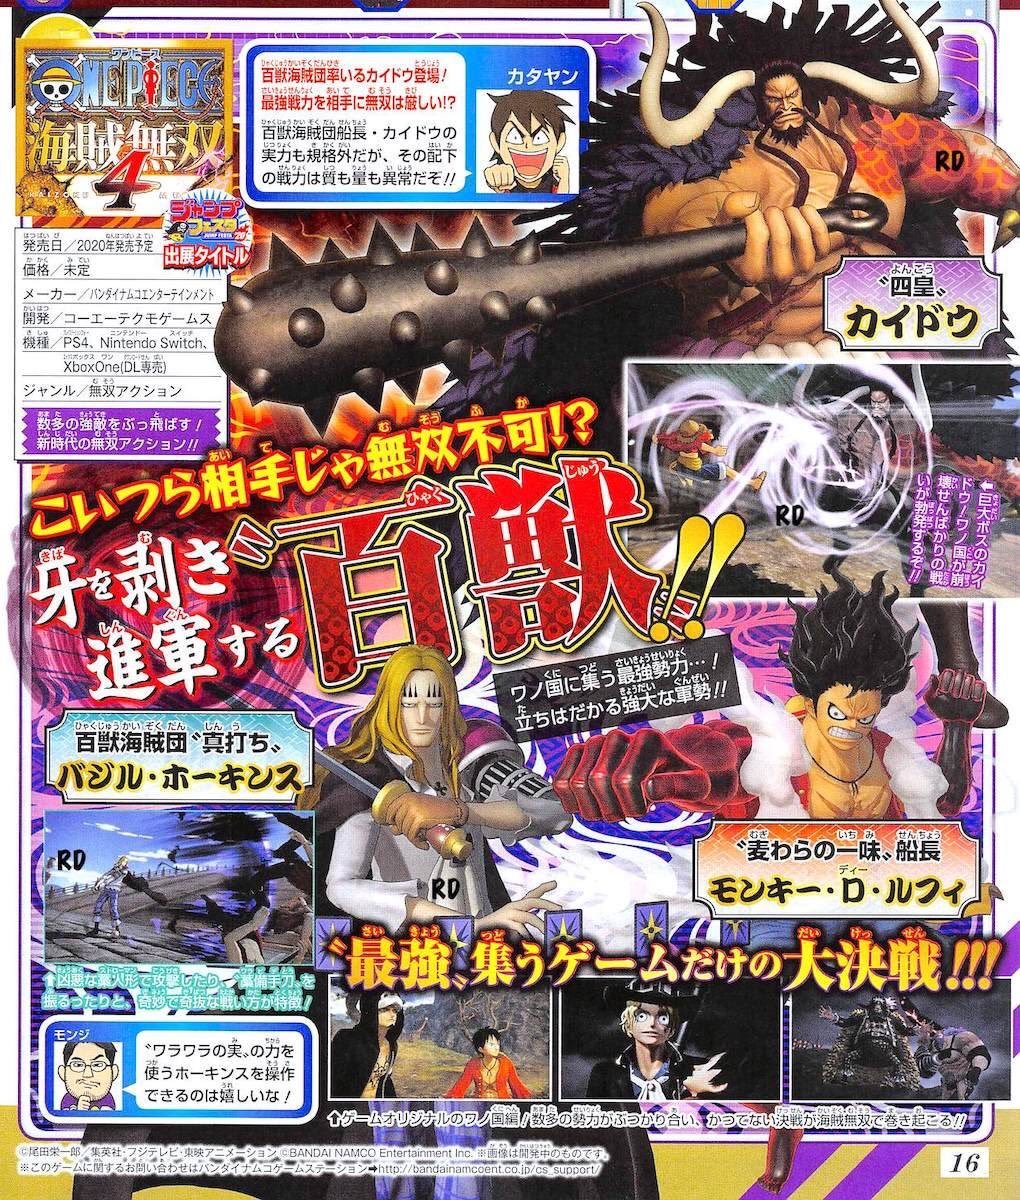 One Piece Pirate Warriors 4 Adds Playable Hawkins Kaido Appearing As A Boss